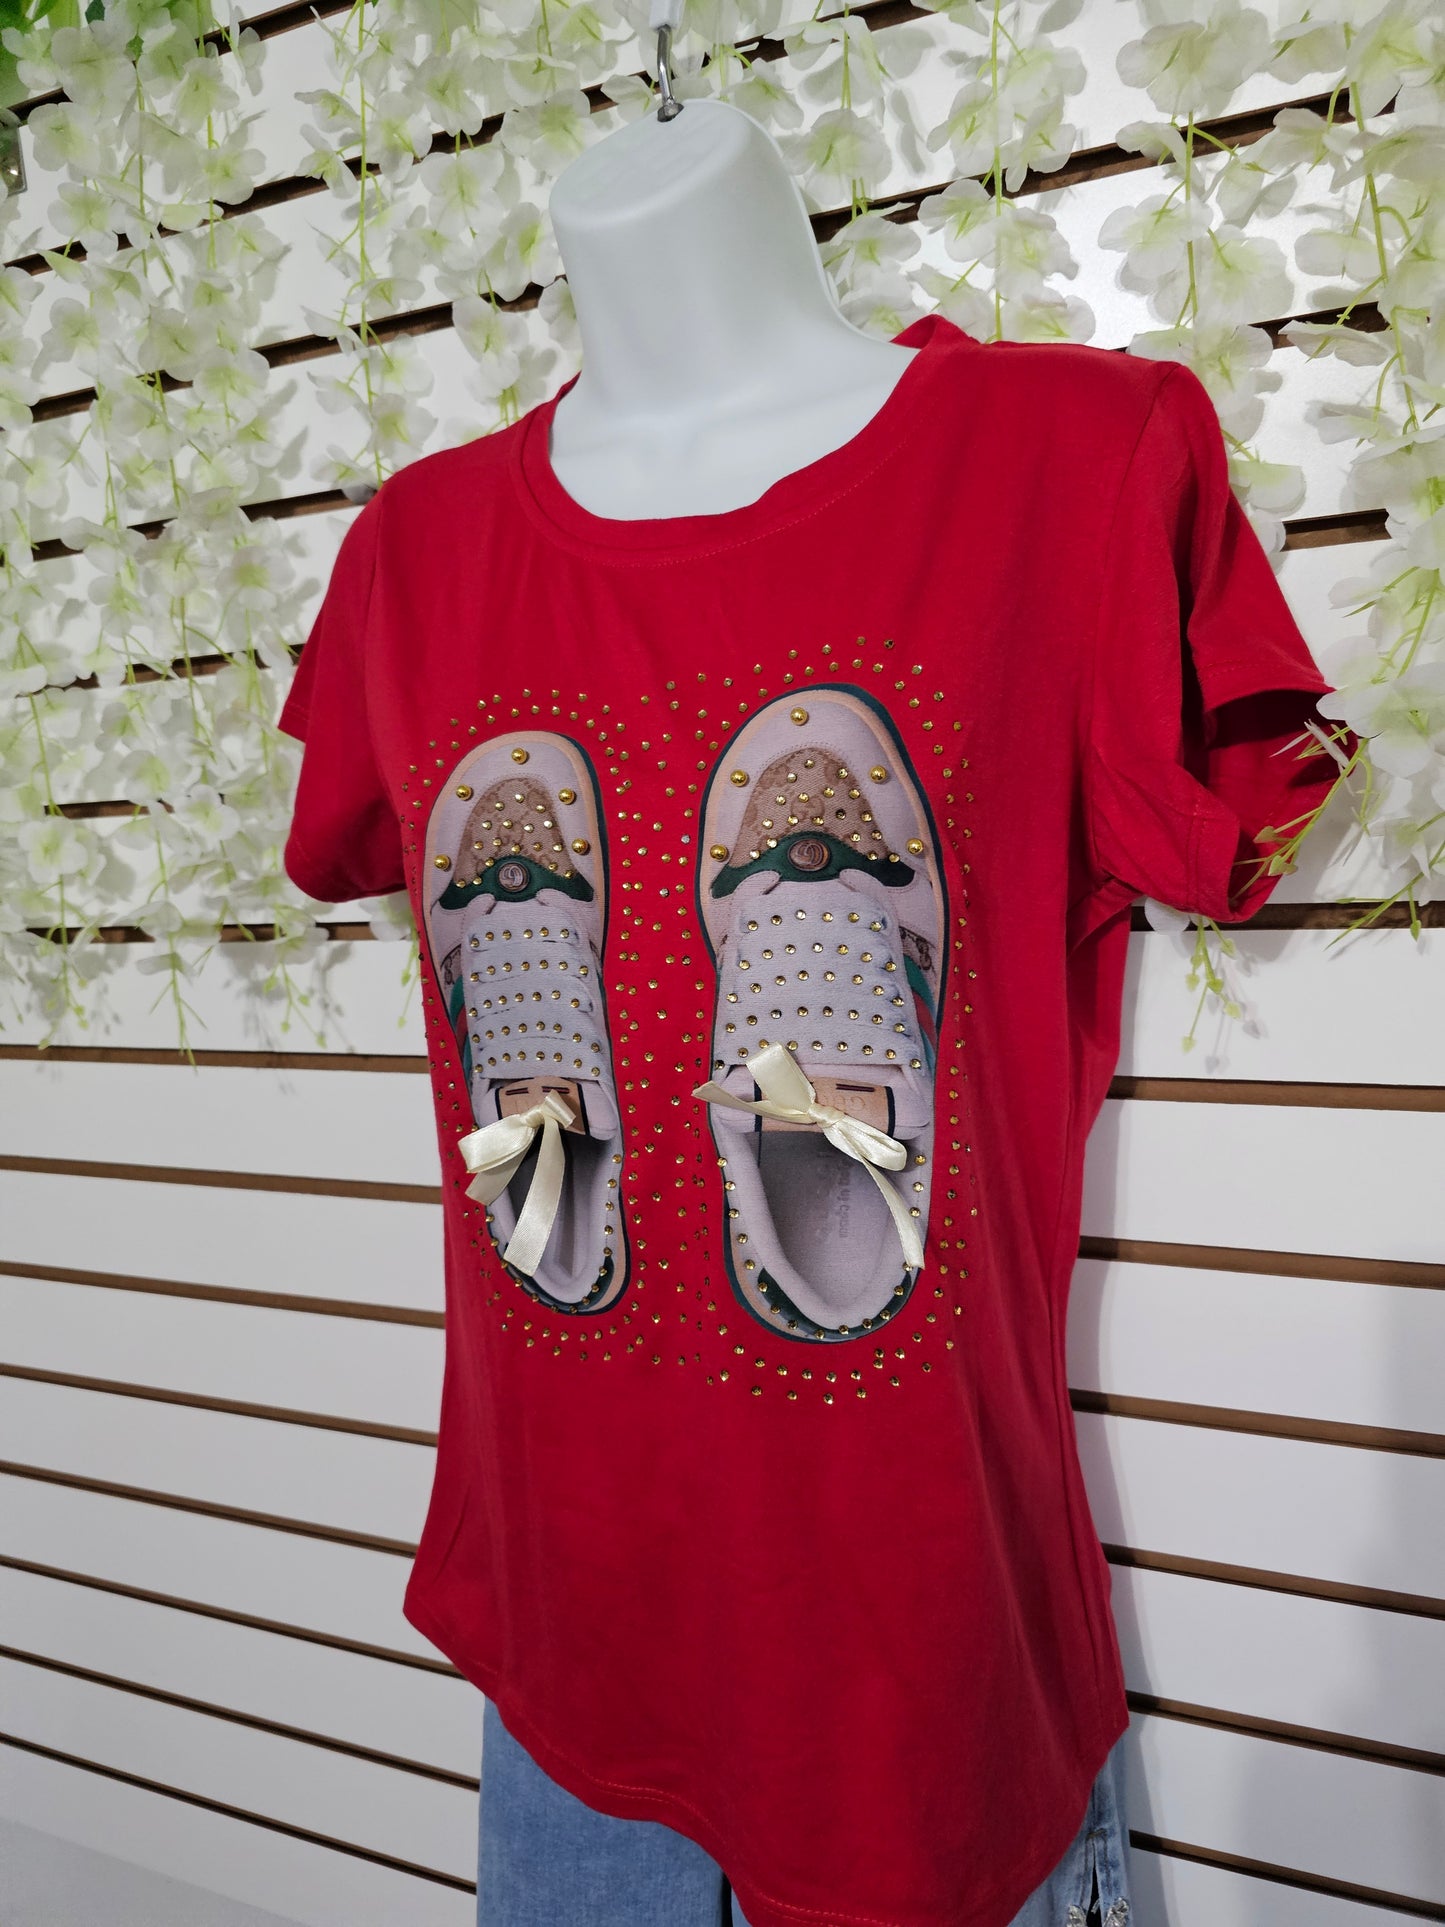 Shoes t-shirt red